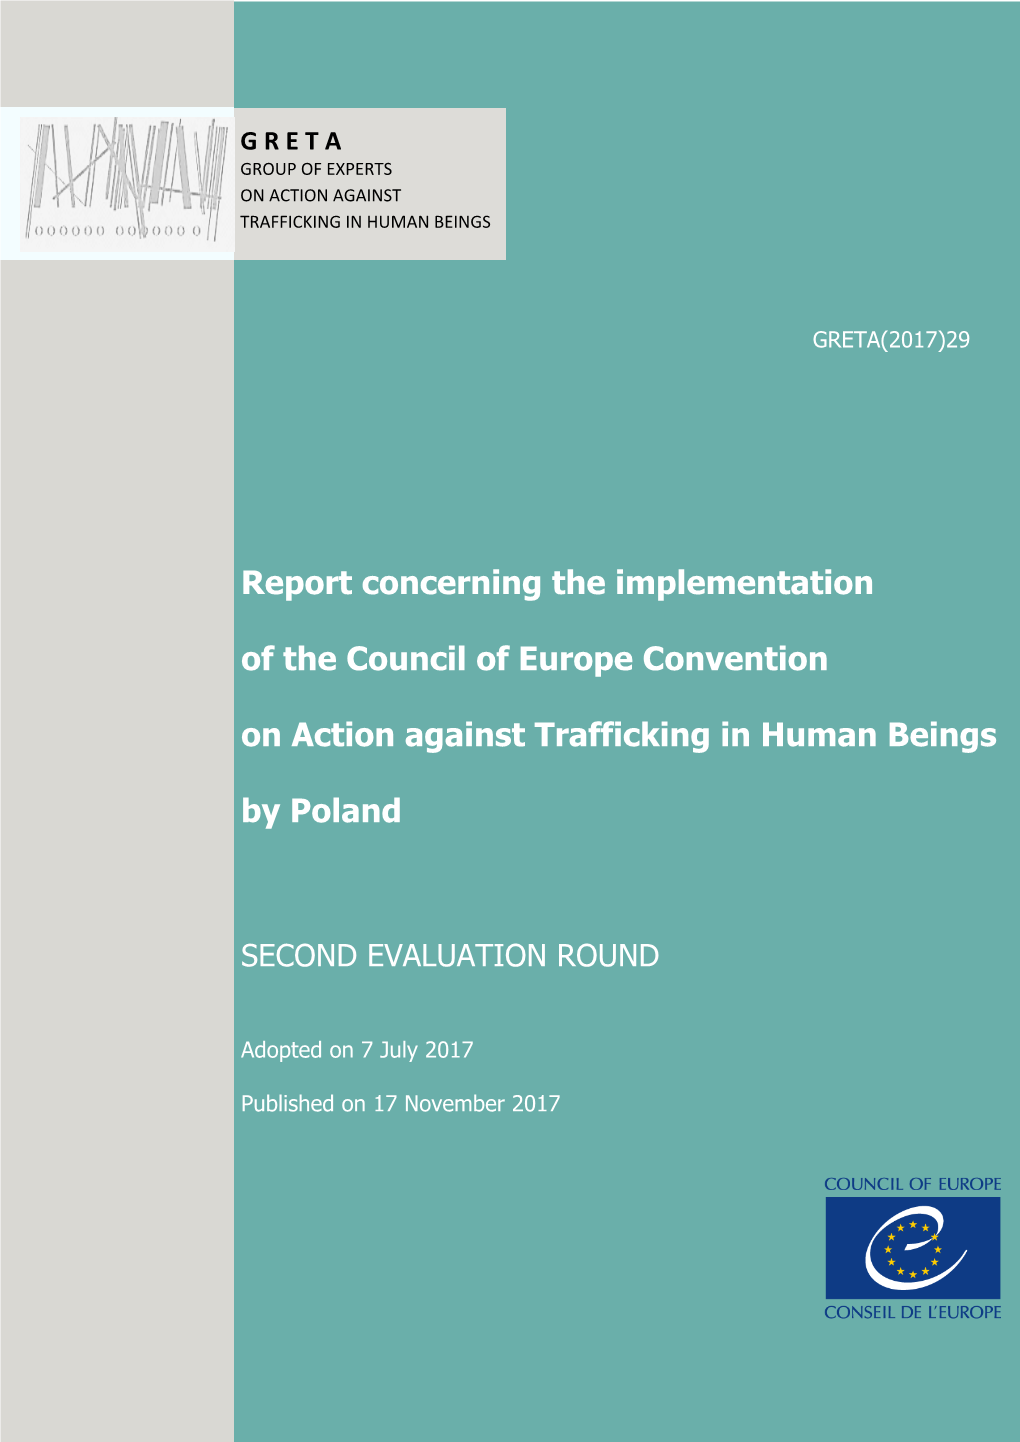 Report Concerning the Implementation of the Council of Europe Convention on Action Against Trafficking in Human Beings by Poland